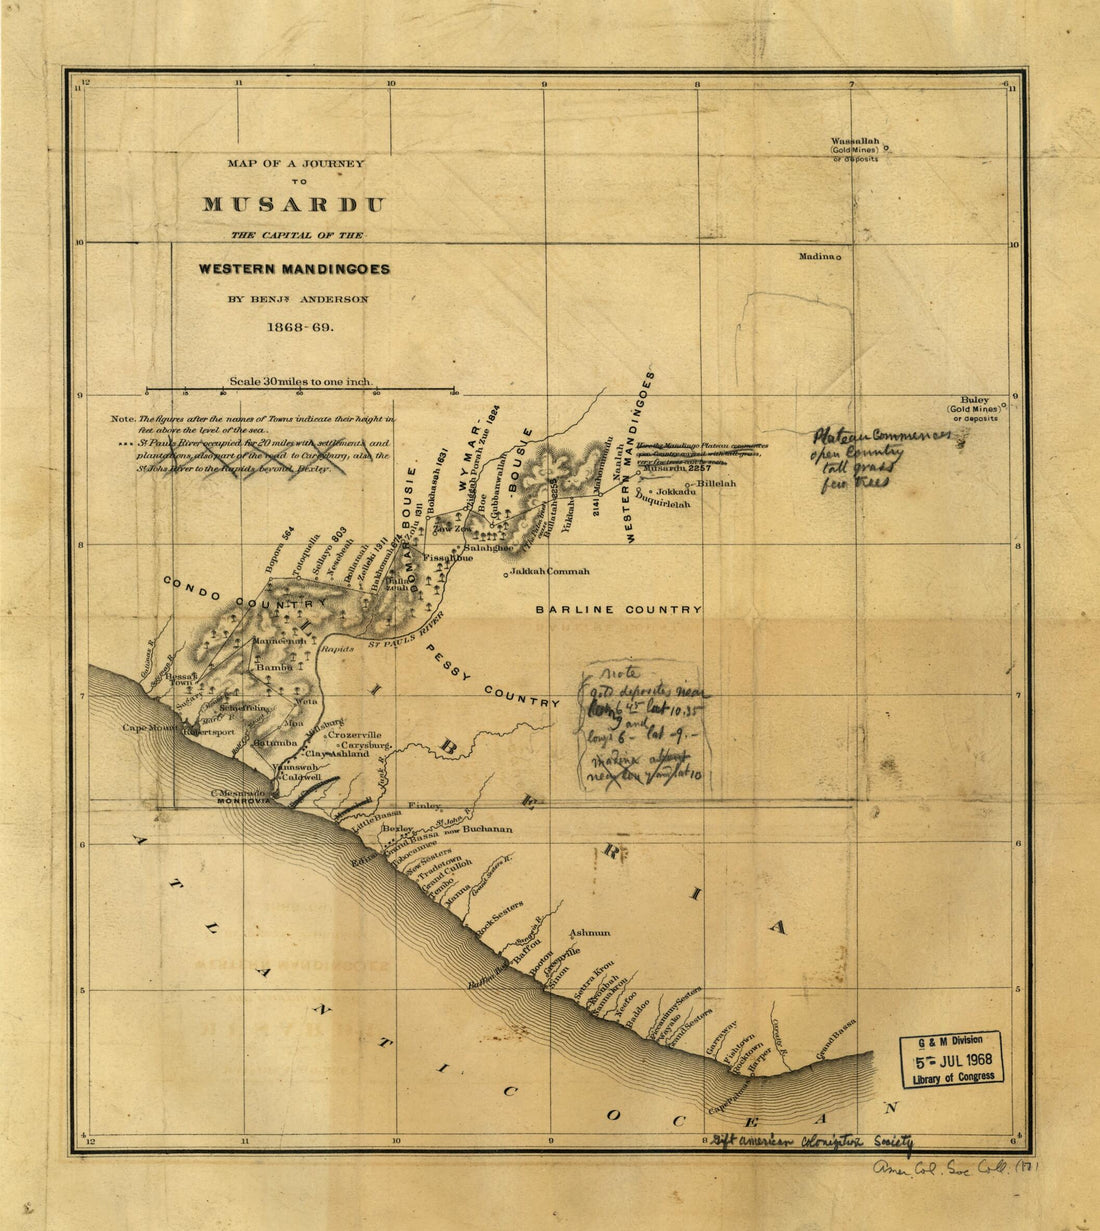 This old map of Map of a Journey to Musardu, the Capital of the Western Mandingoes from 1869 was created by Benjamin J. K. Anderson in 1869